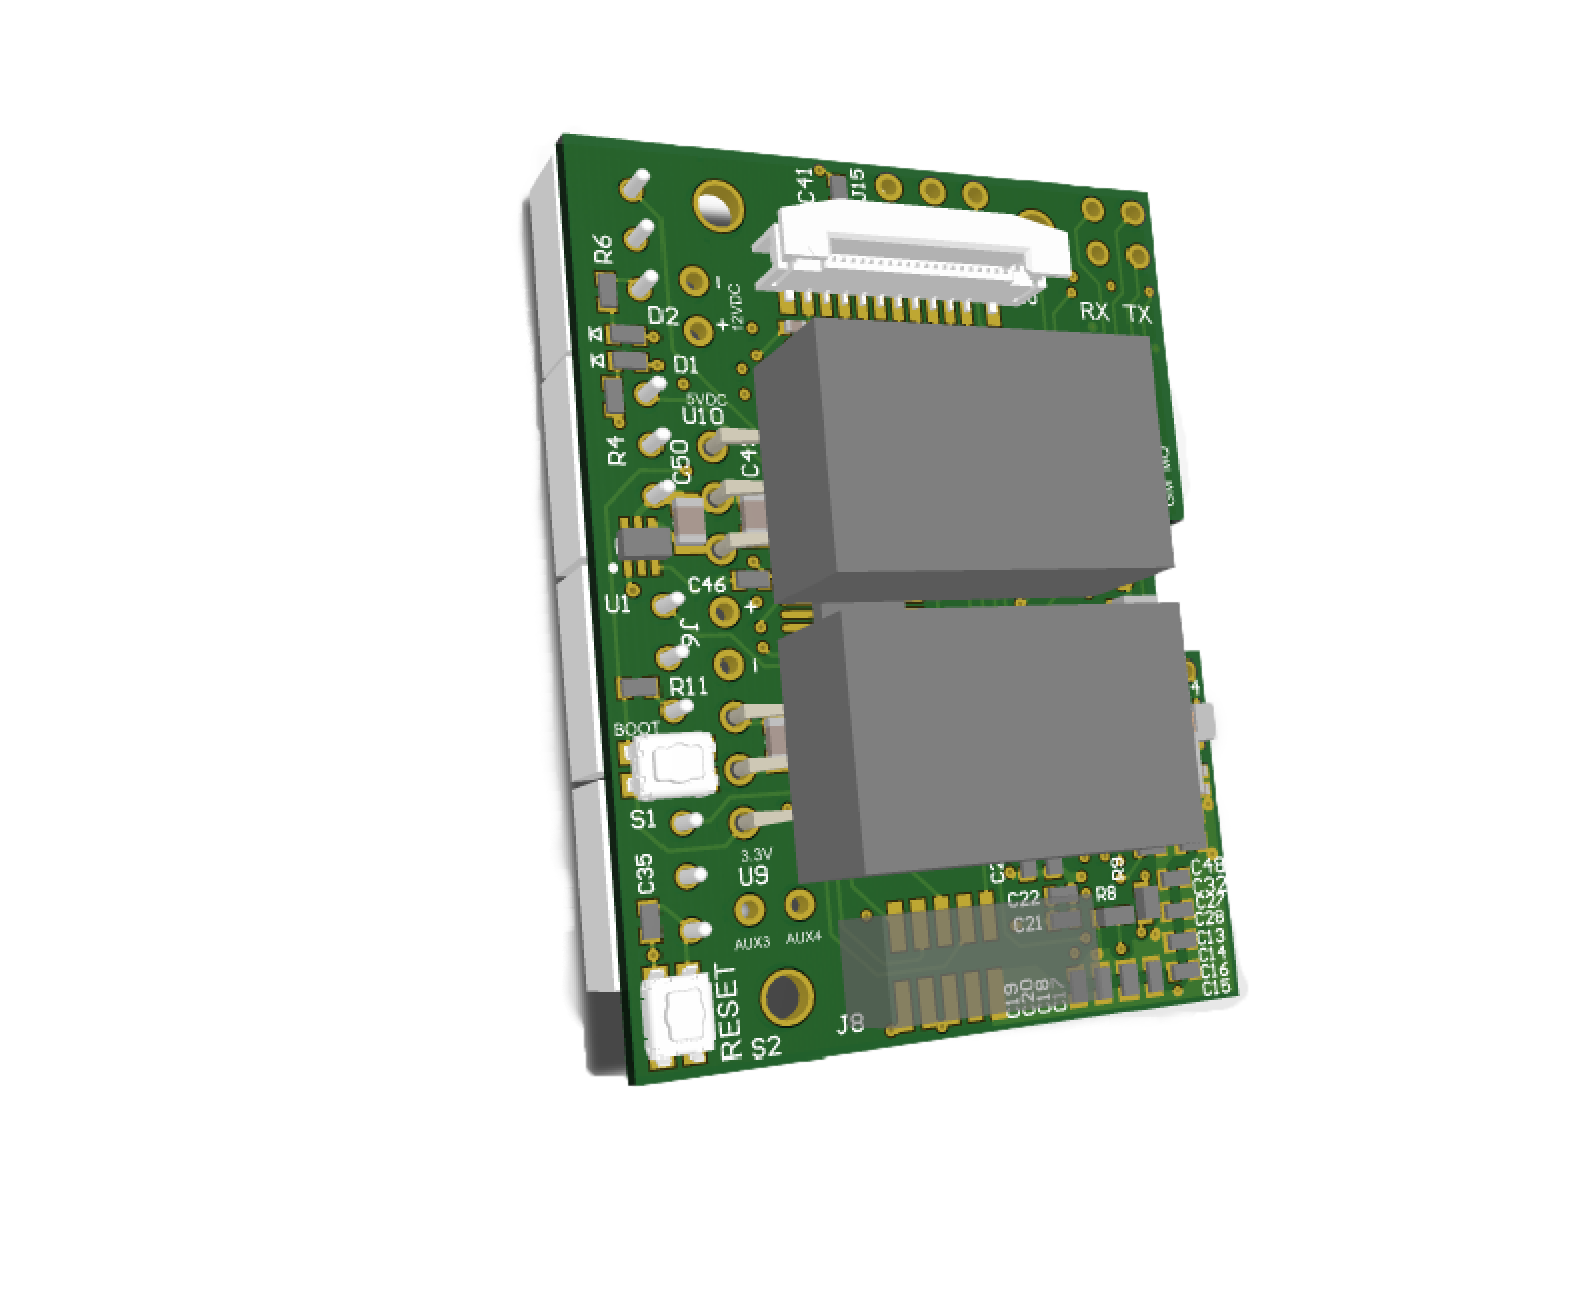 osrf_pcb_iso.png